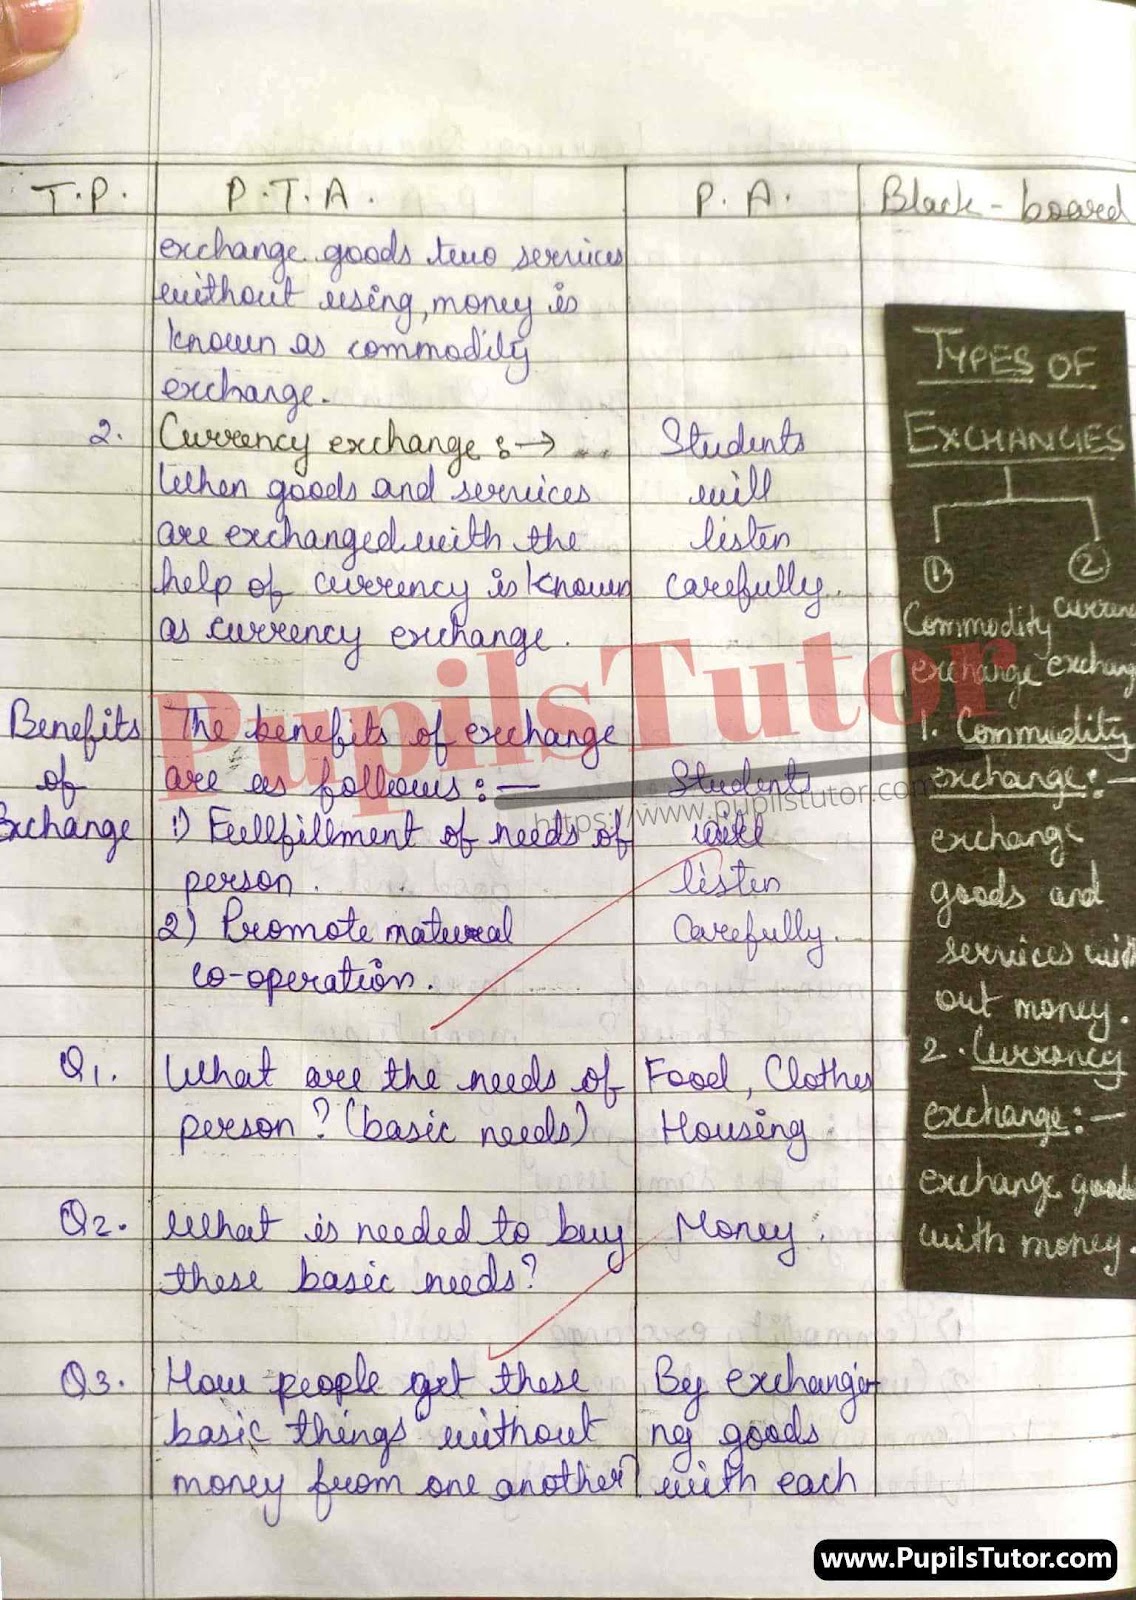 BED, DELED, BTC, BSTC, M.ED, DED And NIOS Teaching Of Economics Innovative Digital Lesson Plan Format On Exchange Topic For Class 9th, 10th, 11th, 12th  – [Page And Photo 4] – pupilstutor.com